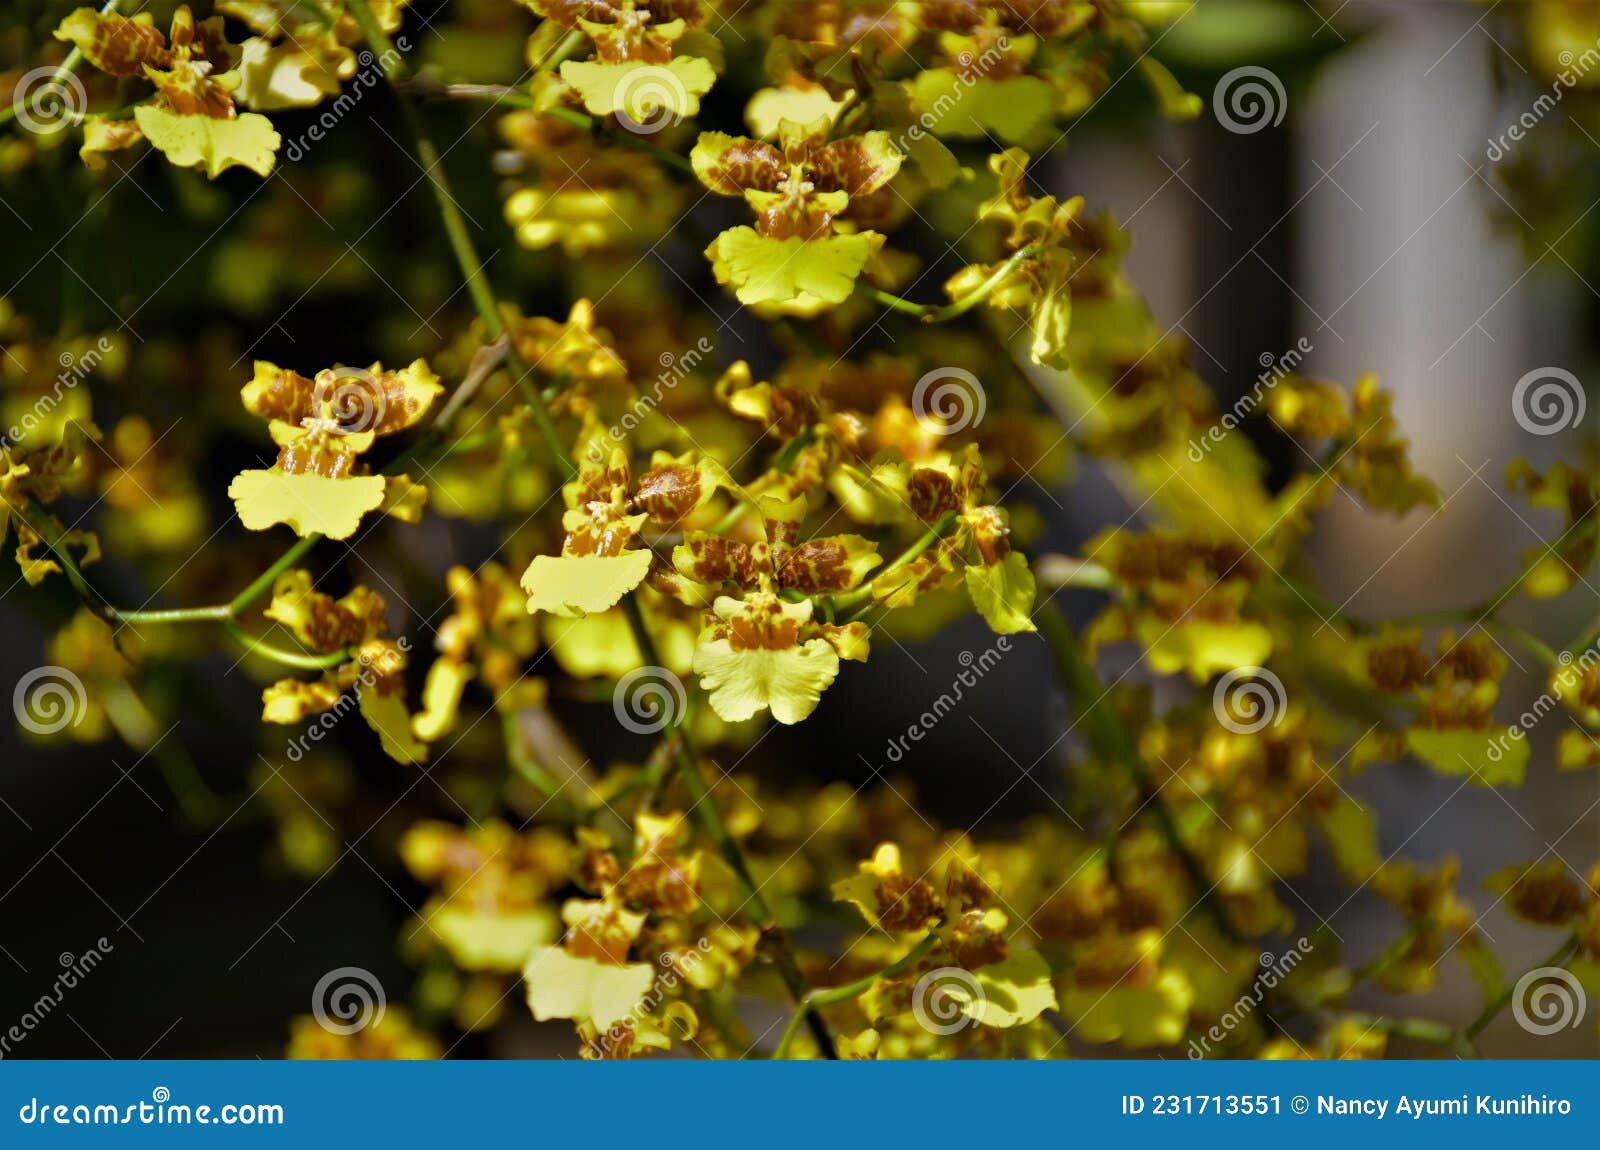 details of the flowers of the oncidium orchid